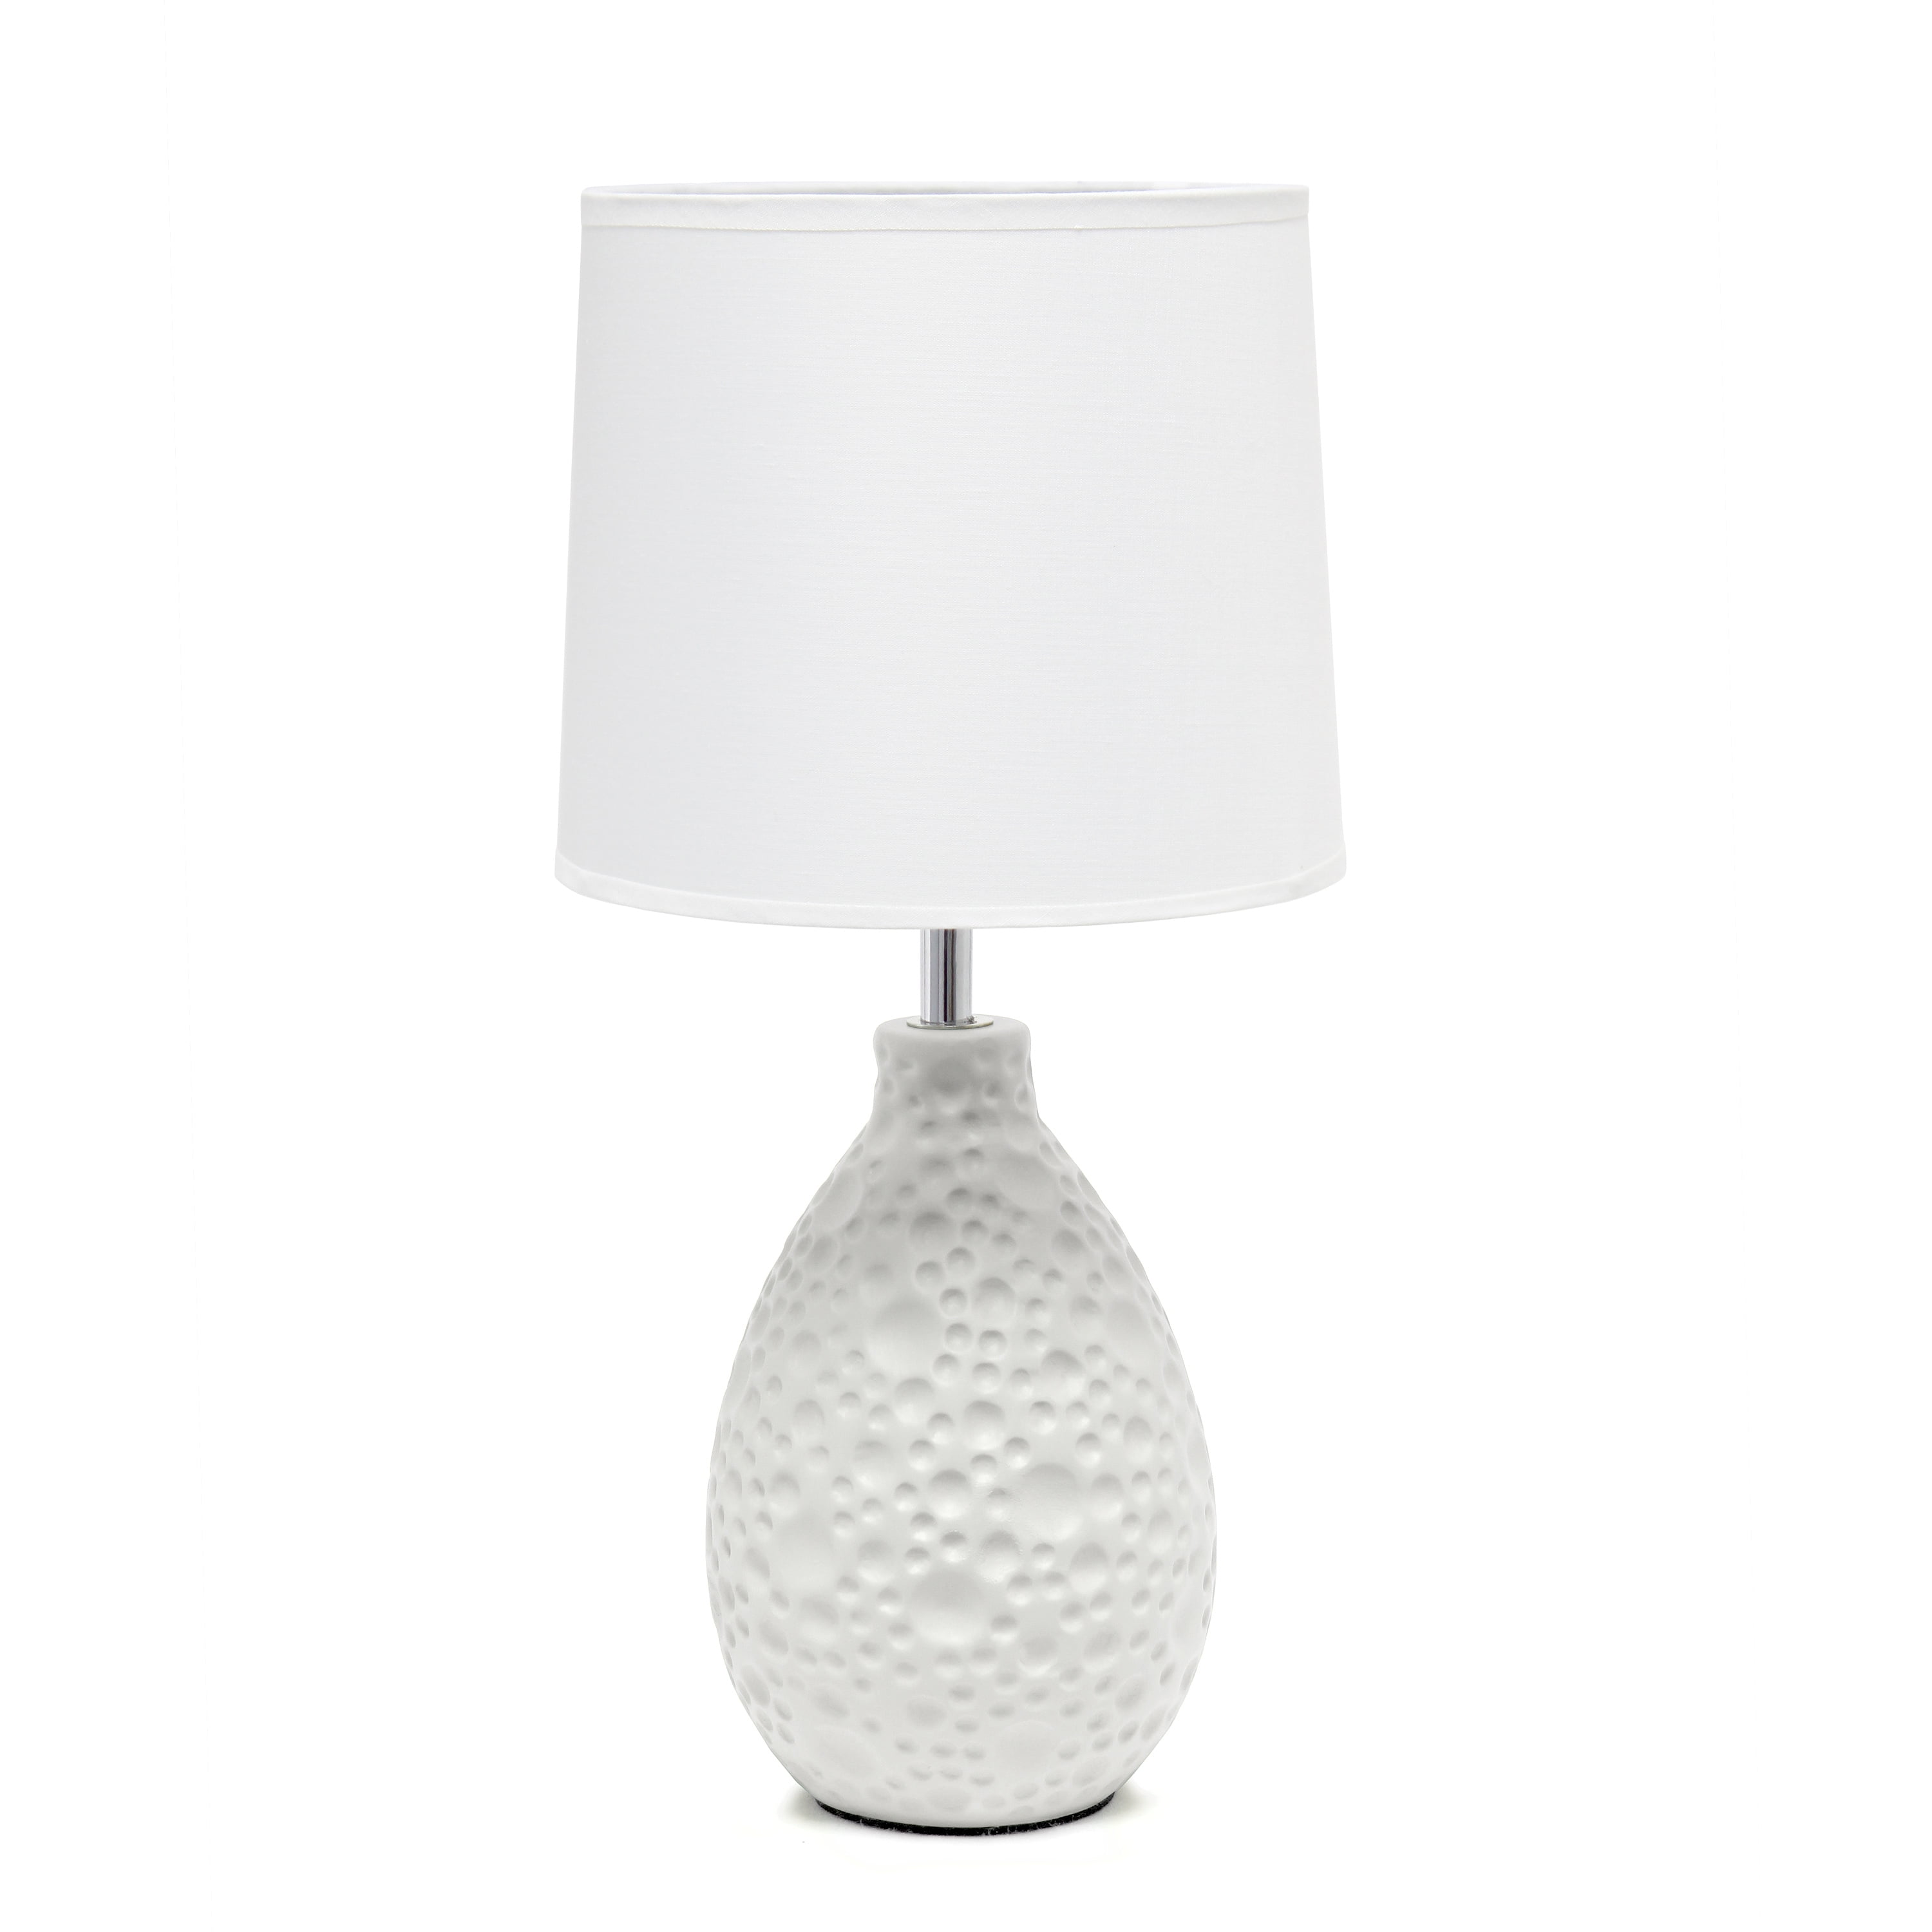 Simple Designs White Texturized Ceramic Oval Table Lamp